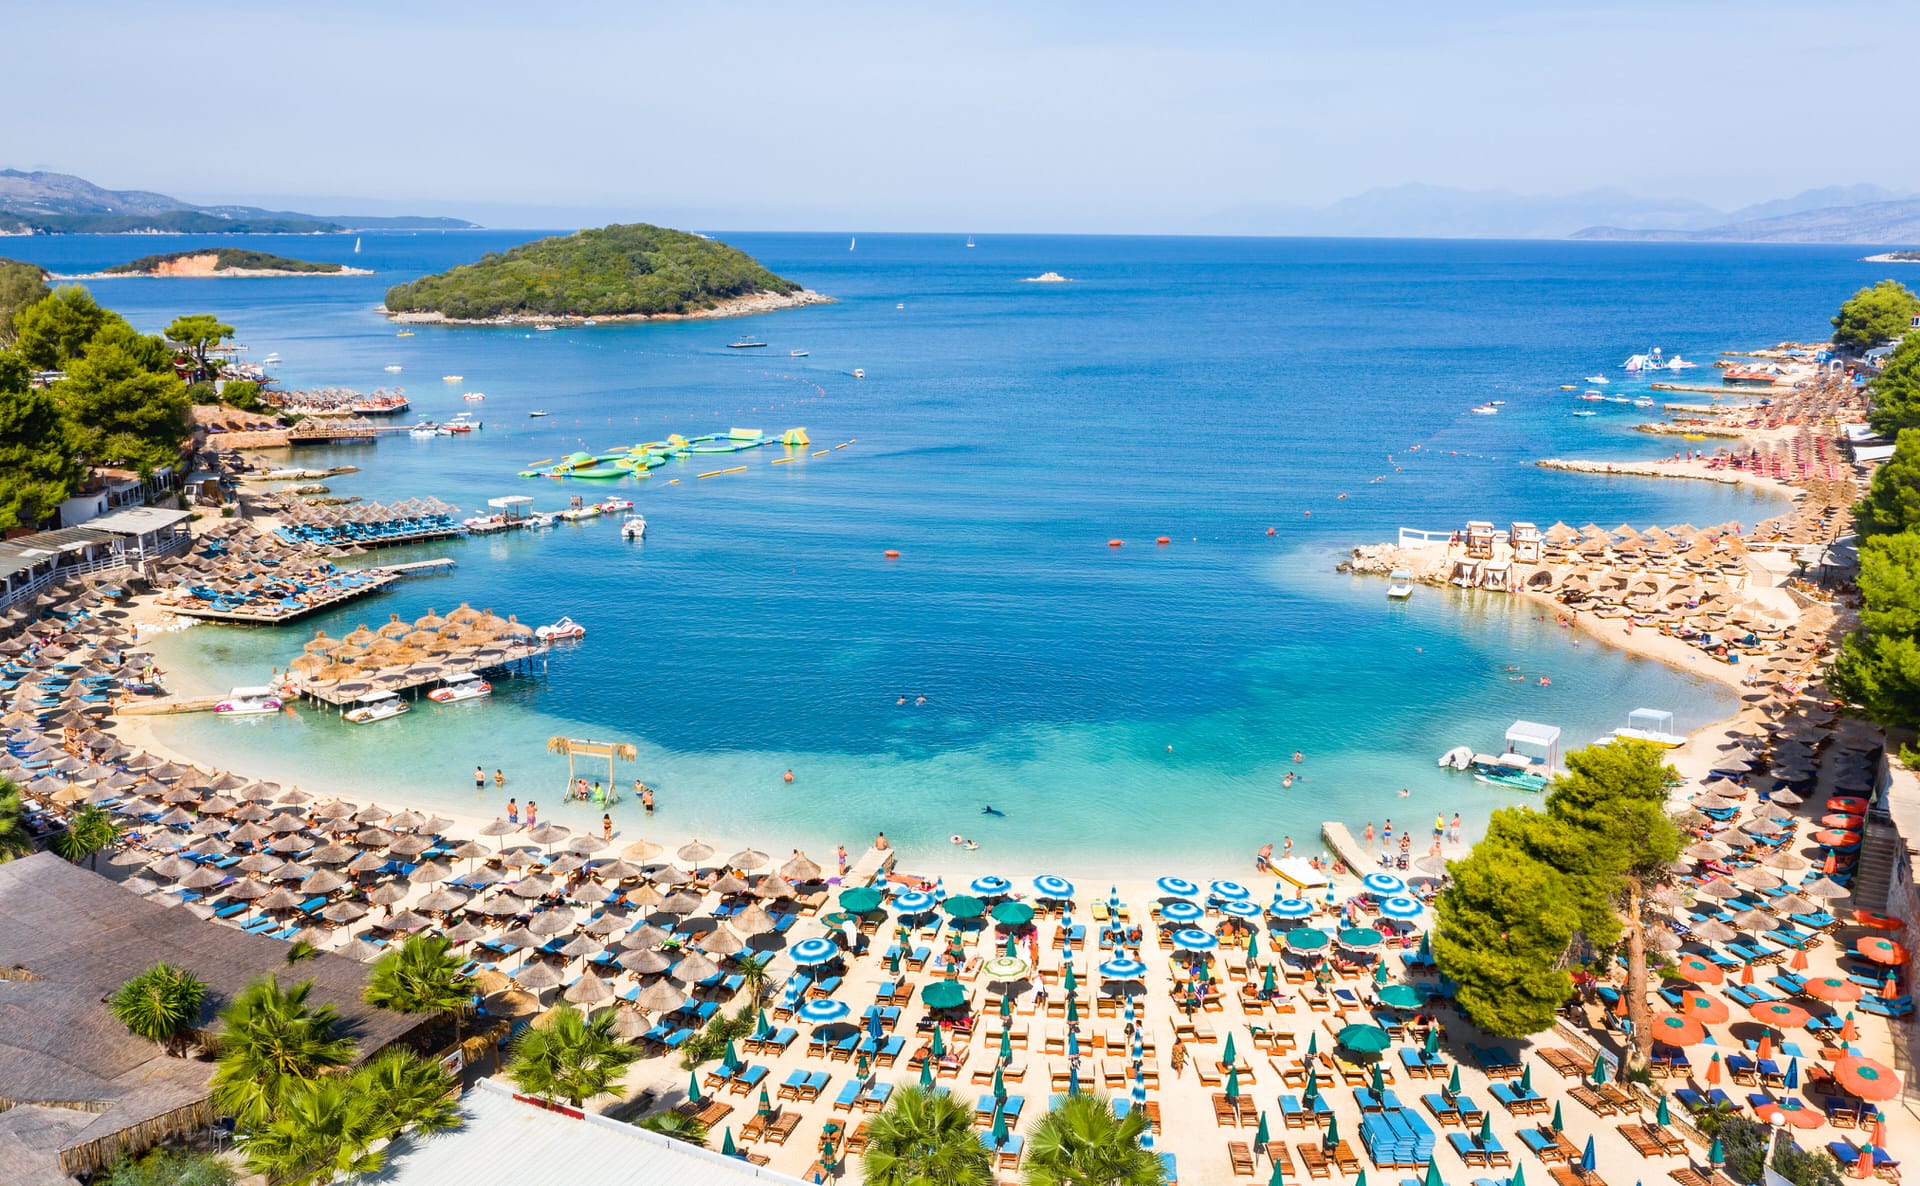 Beautiful beaches of Ksamil with its four islands in the distance